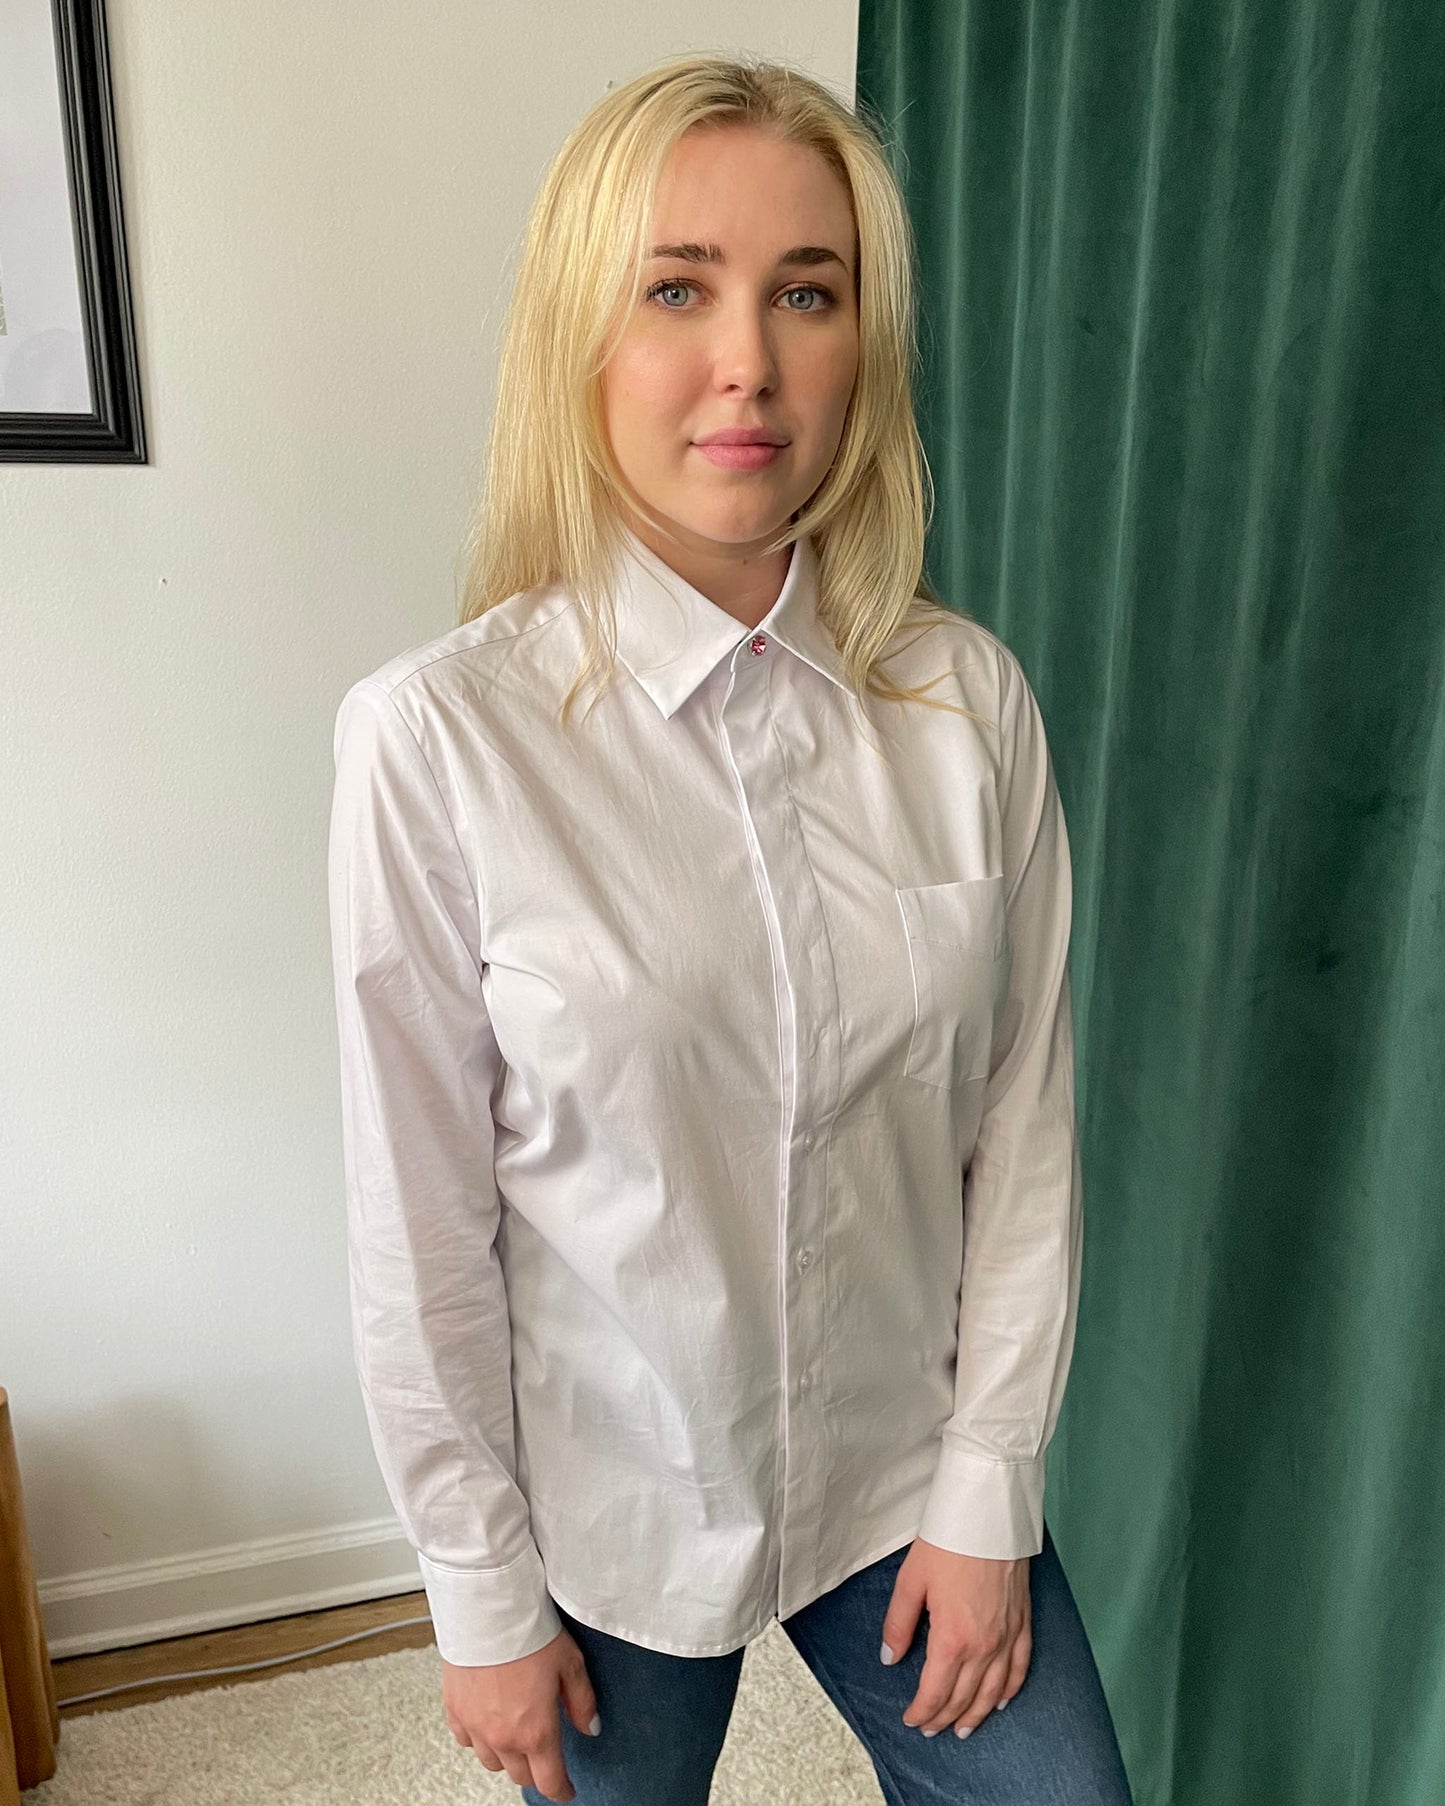 White organic cotton long sleeve button down fully buttoned with pink cuff link on blonde white model wearing blue jeans in front of green curtains